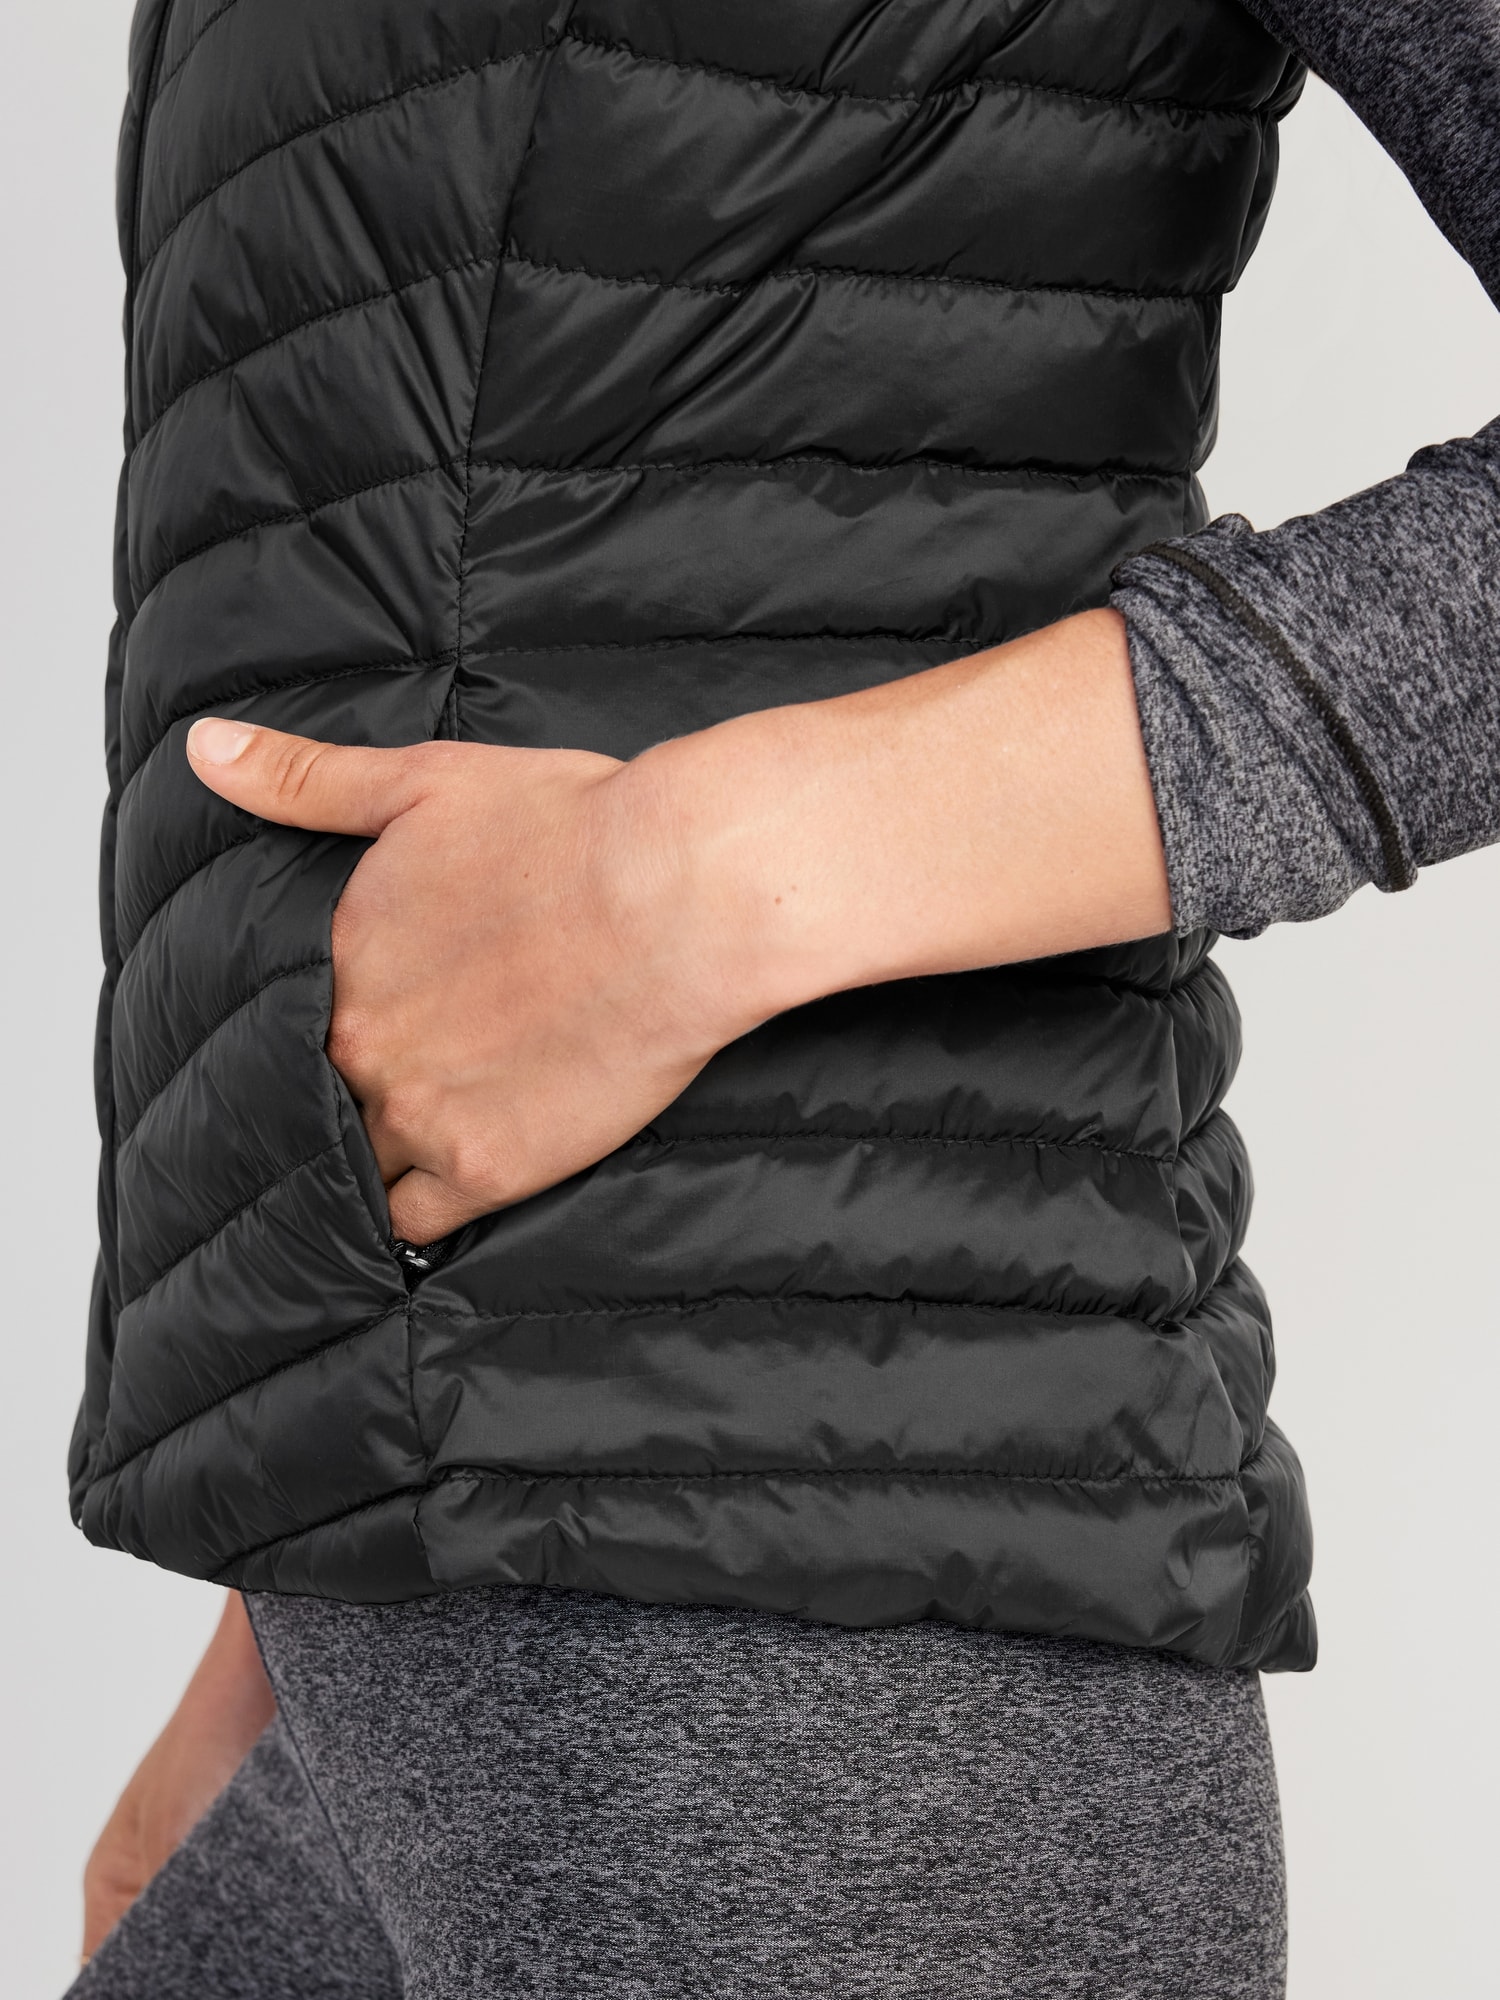 Narrow-Channel Quilted Puffer Vest for Women